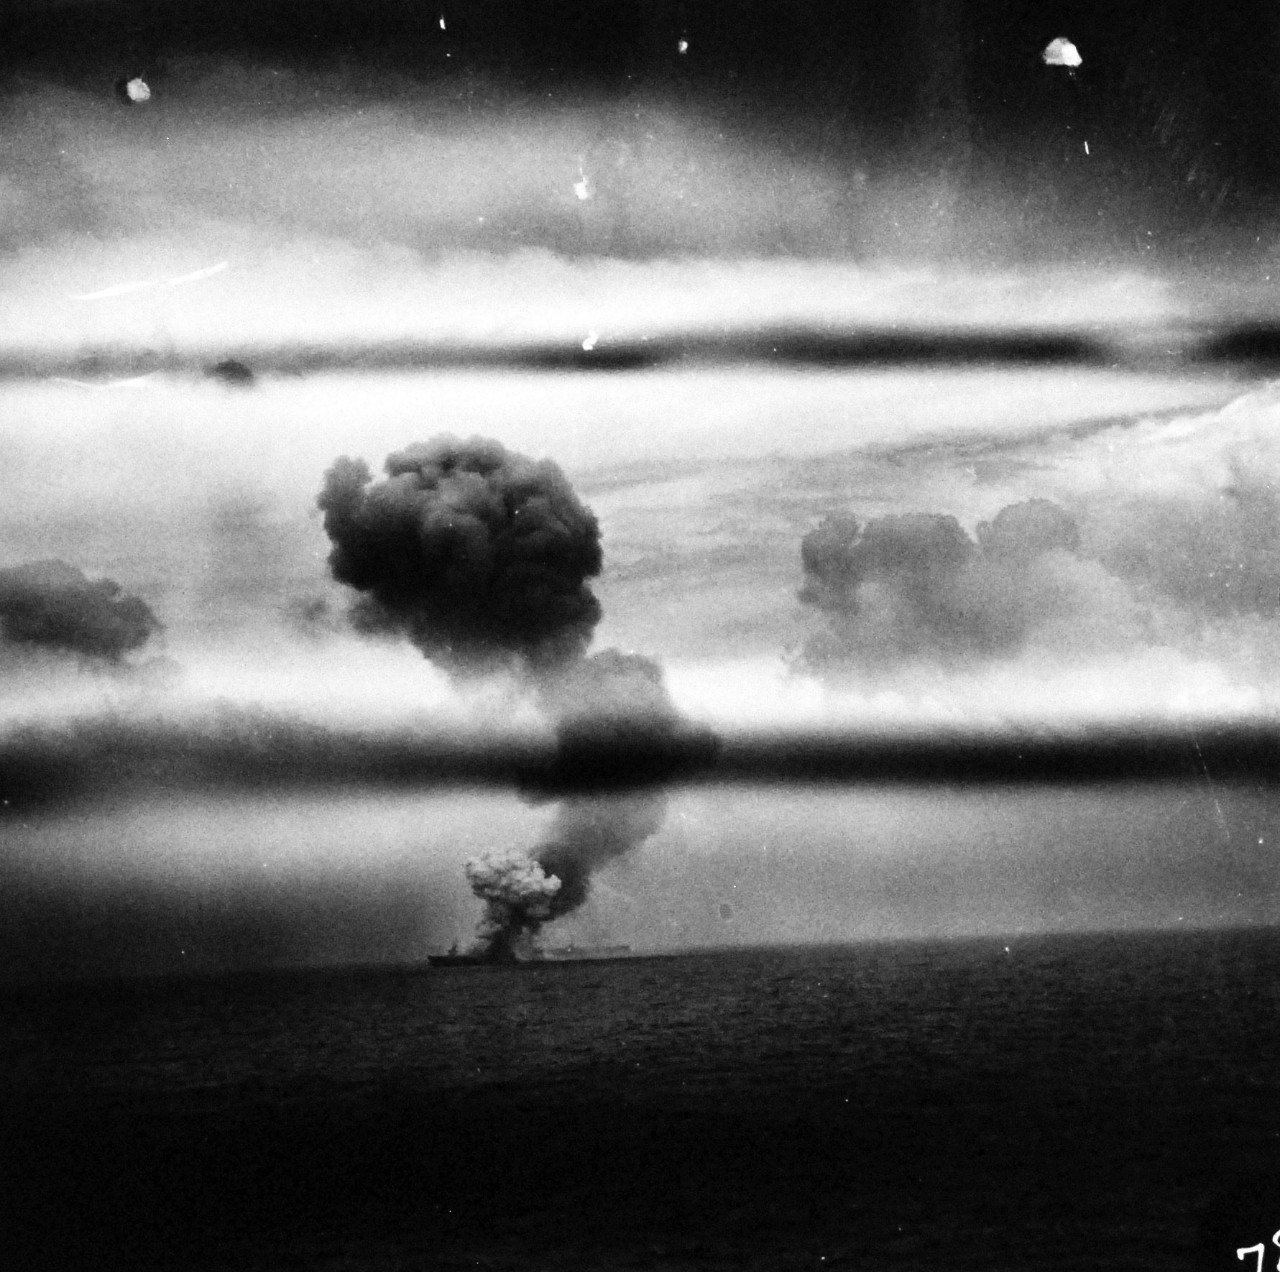 80-G-287511:  USS St. Lo (CVE-63), October 25, 1944.  St. Lo burning after Japanese fighter makes suicide dive onto the flight deck during the Battle of Leyte Gulf.  As seen from USS Kitkun Bay (CVE-71).    Official U.S. Navy photograph, now in the collections of the National Archives.  